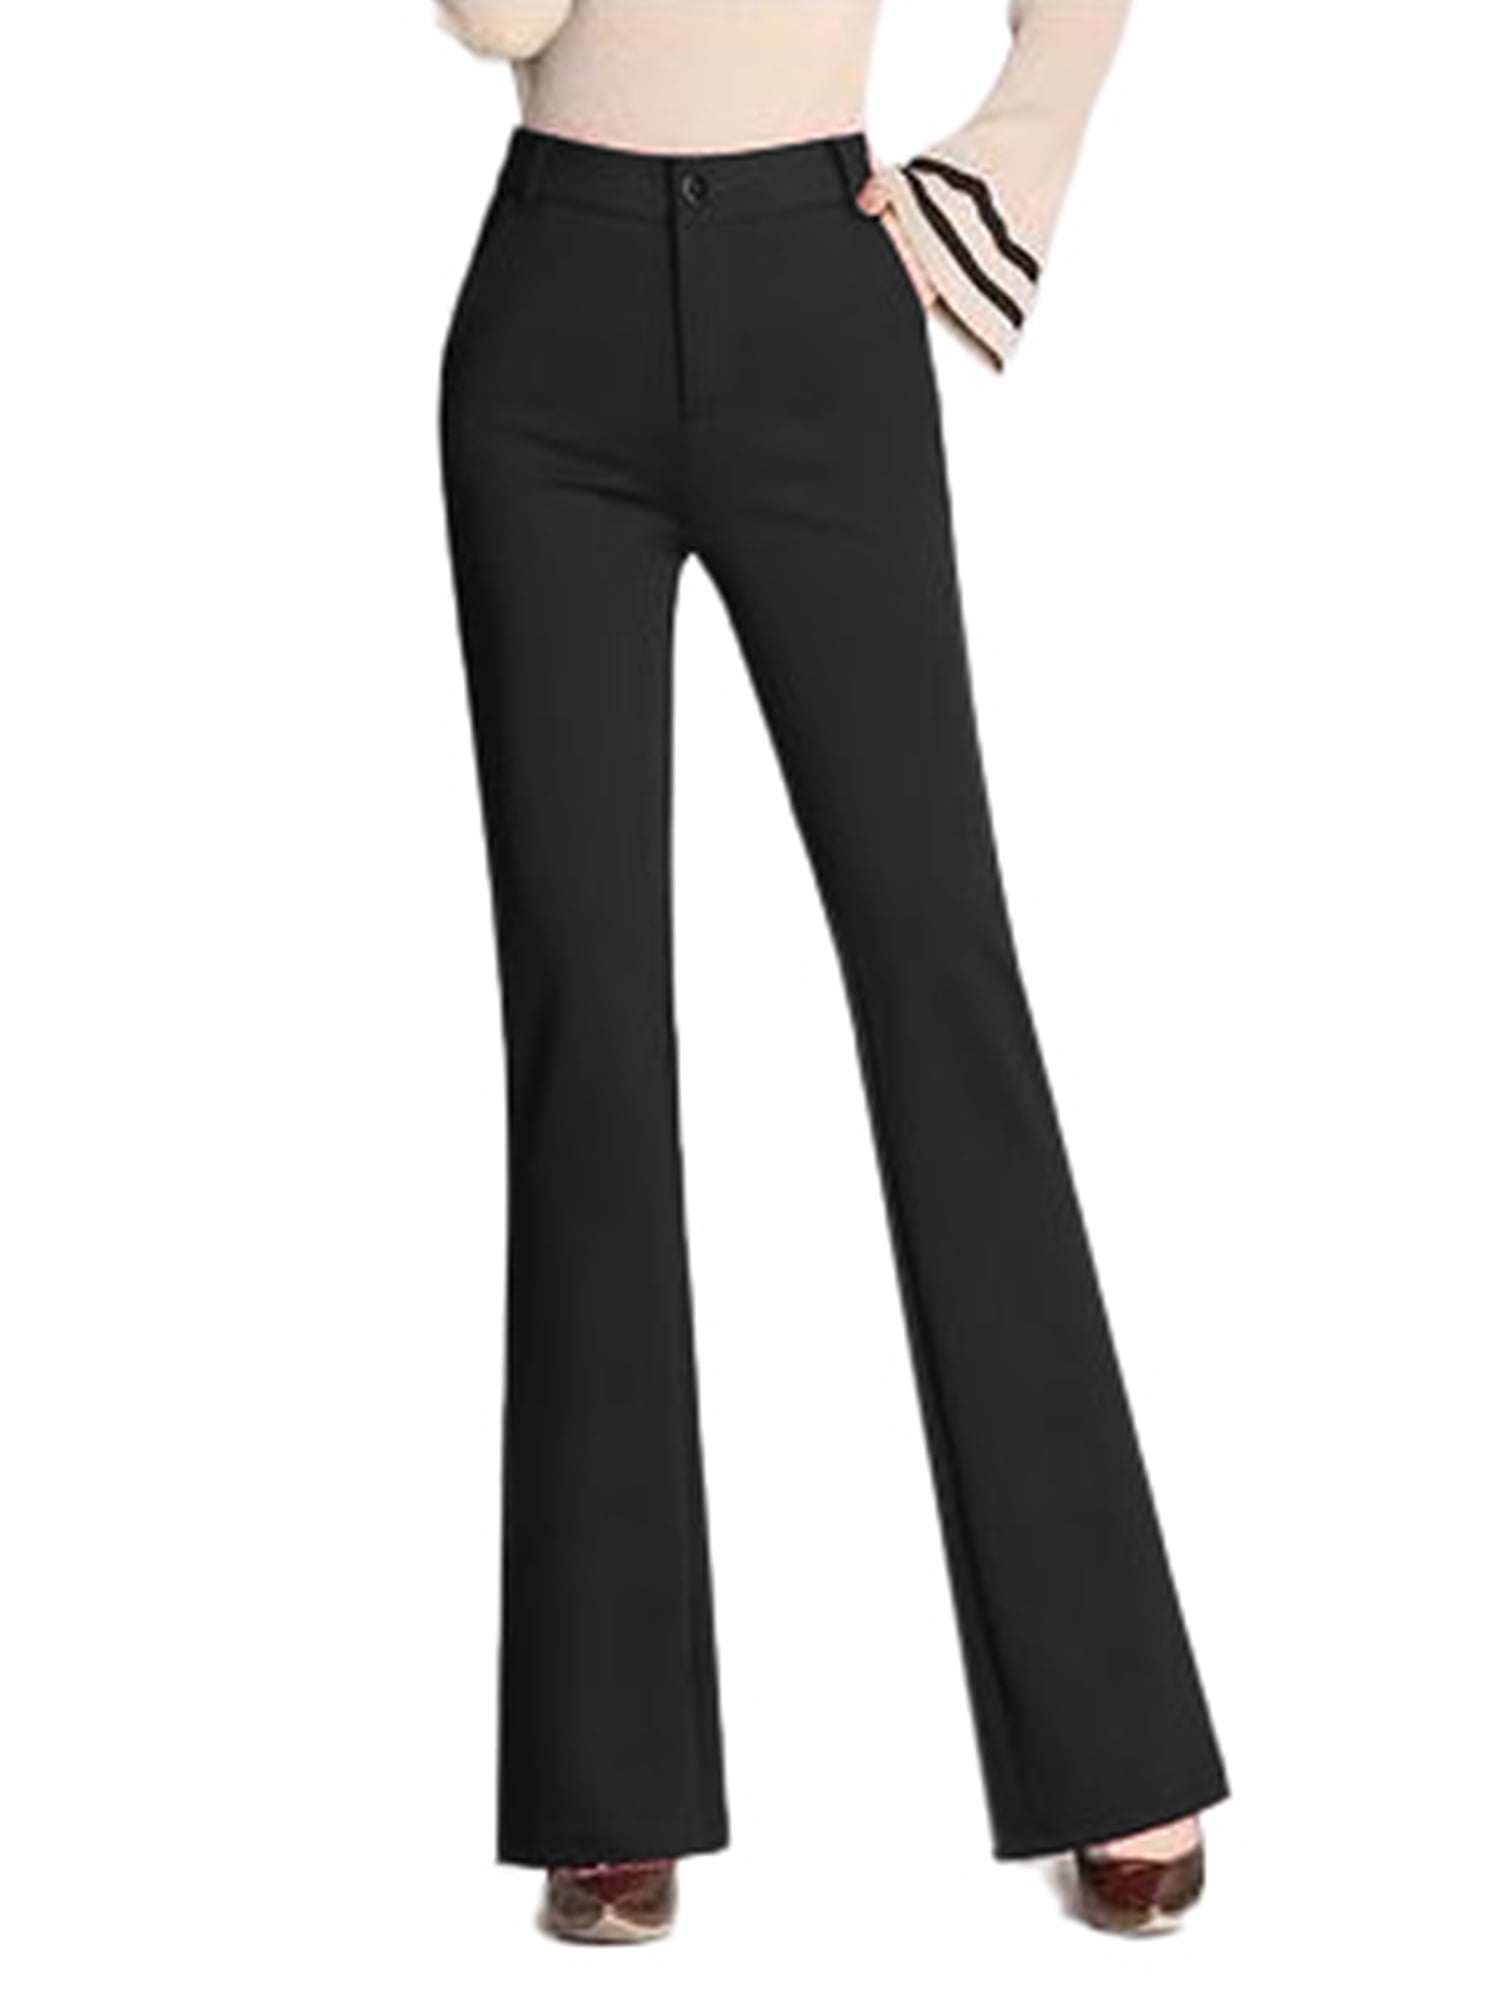 Womens Casual Bell Bottoms with Pockets Fashion Ladies Solid Color Dress  Pants High Waist Office Work Flare Trousers 